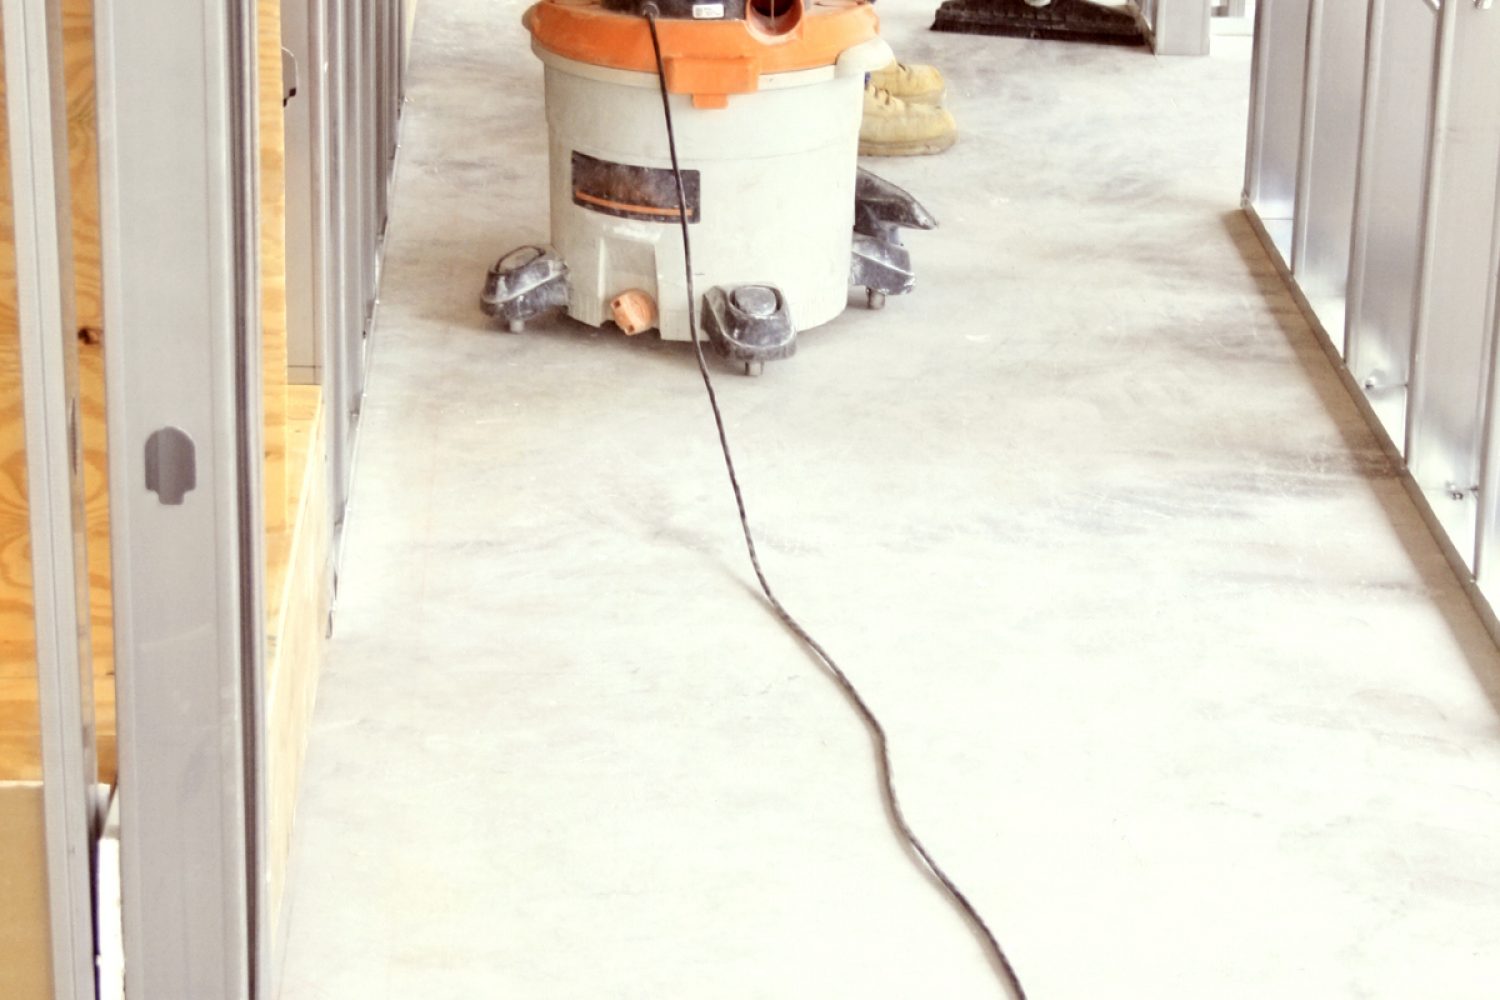 A construction worker vacuums the cement floor with a wet/dry vac.